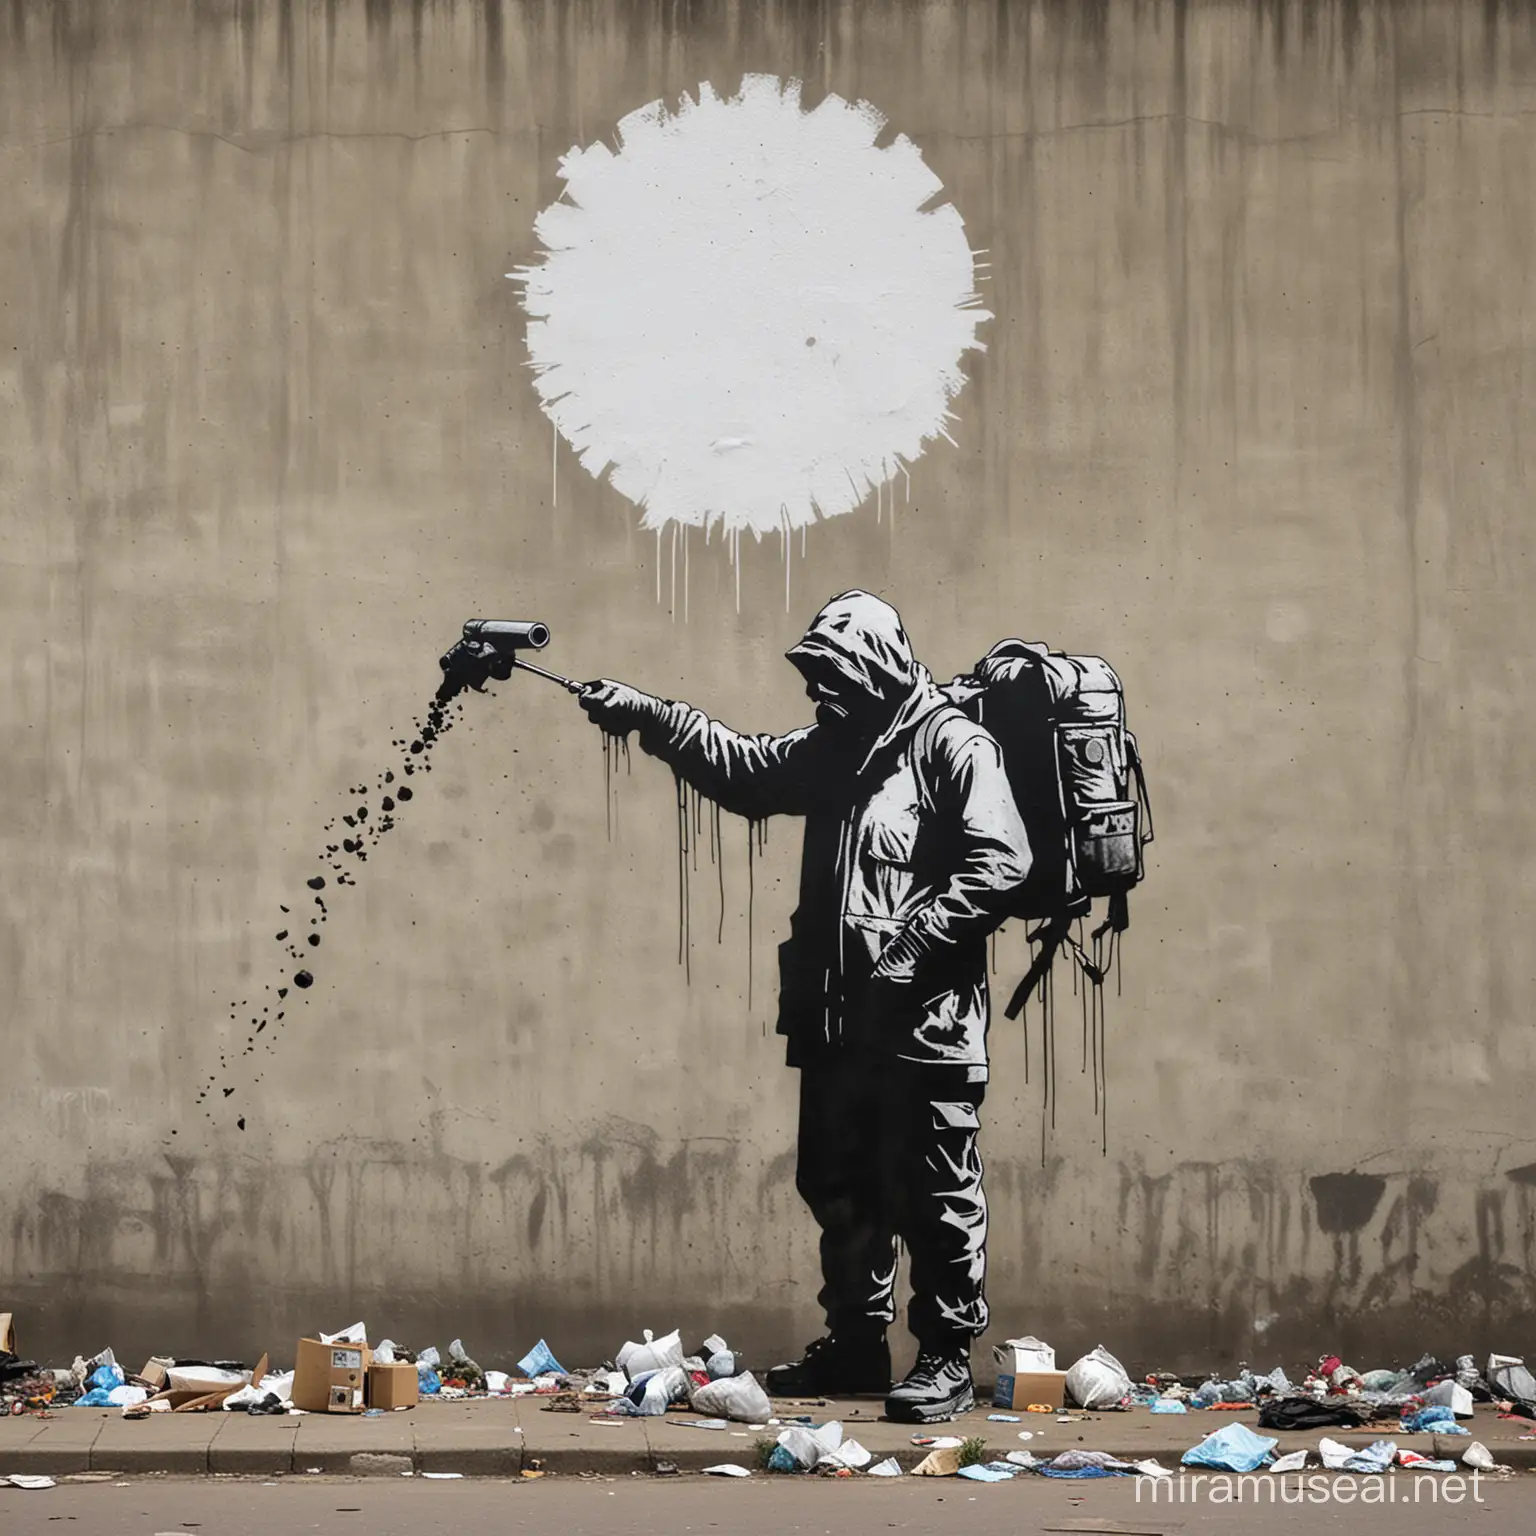 Banksy Style Graffiti Depicting Global Pollution